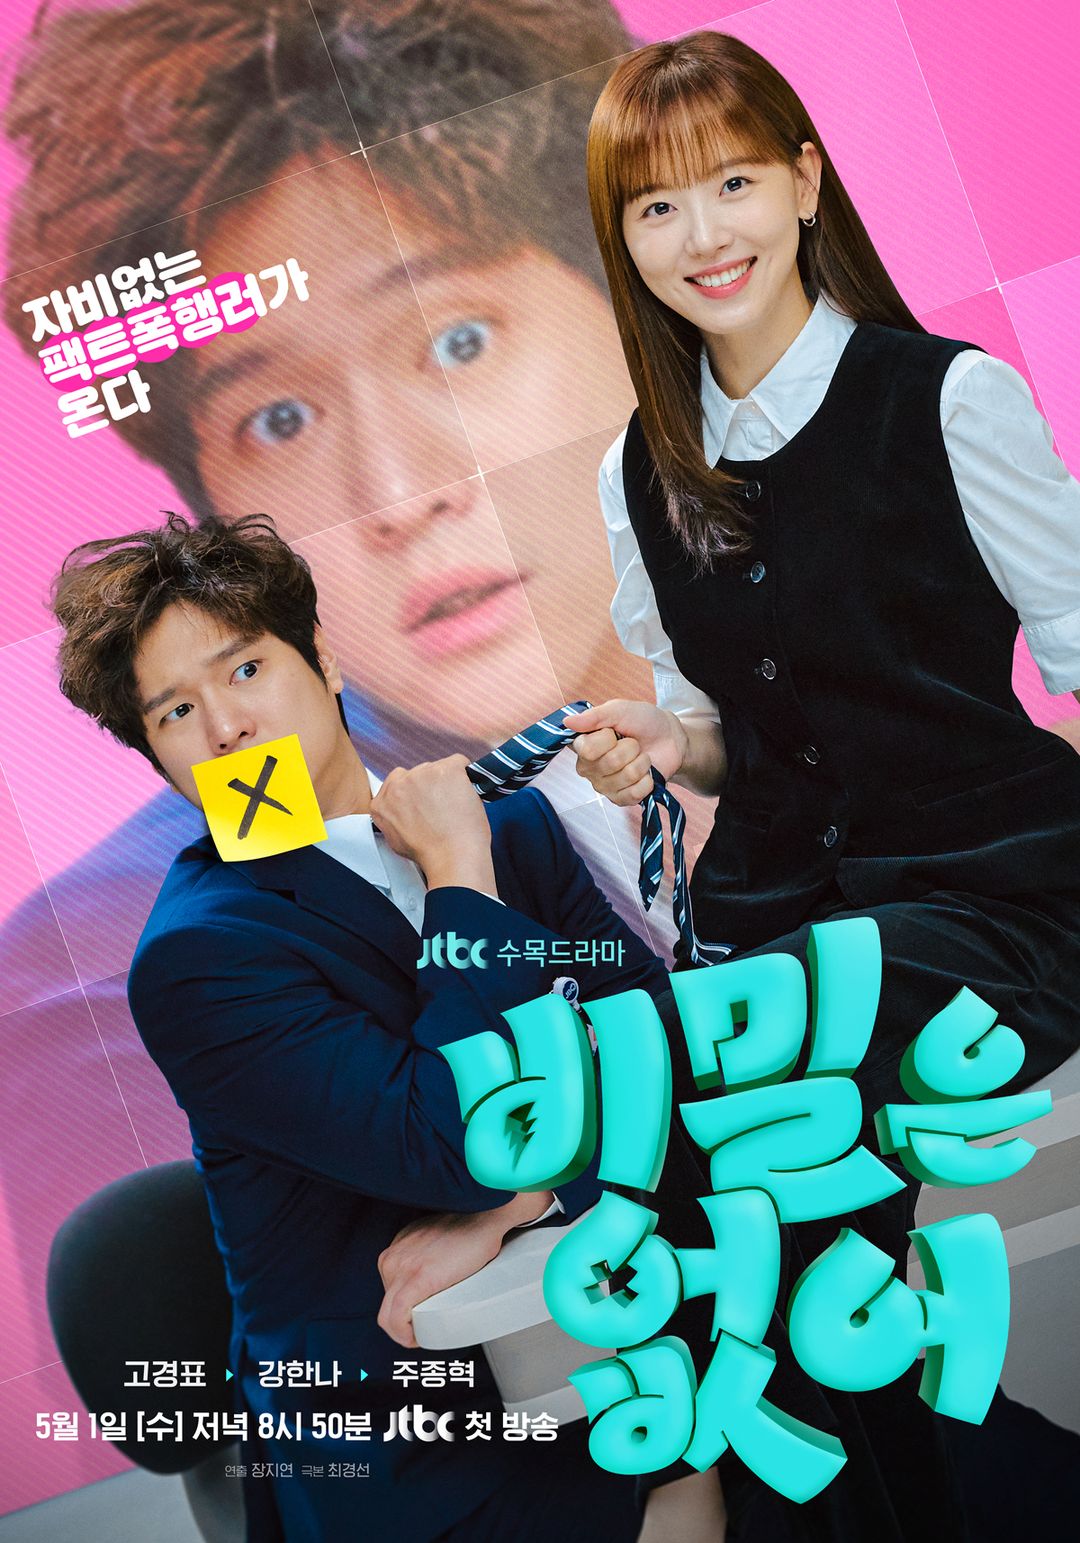 Go Kyung Pyo's Inability To Lie Catches Kang Han Na's Eye In New Rom-Com 